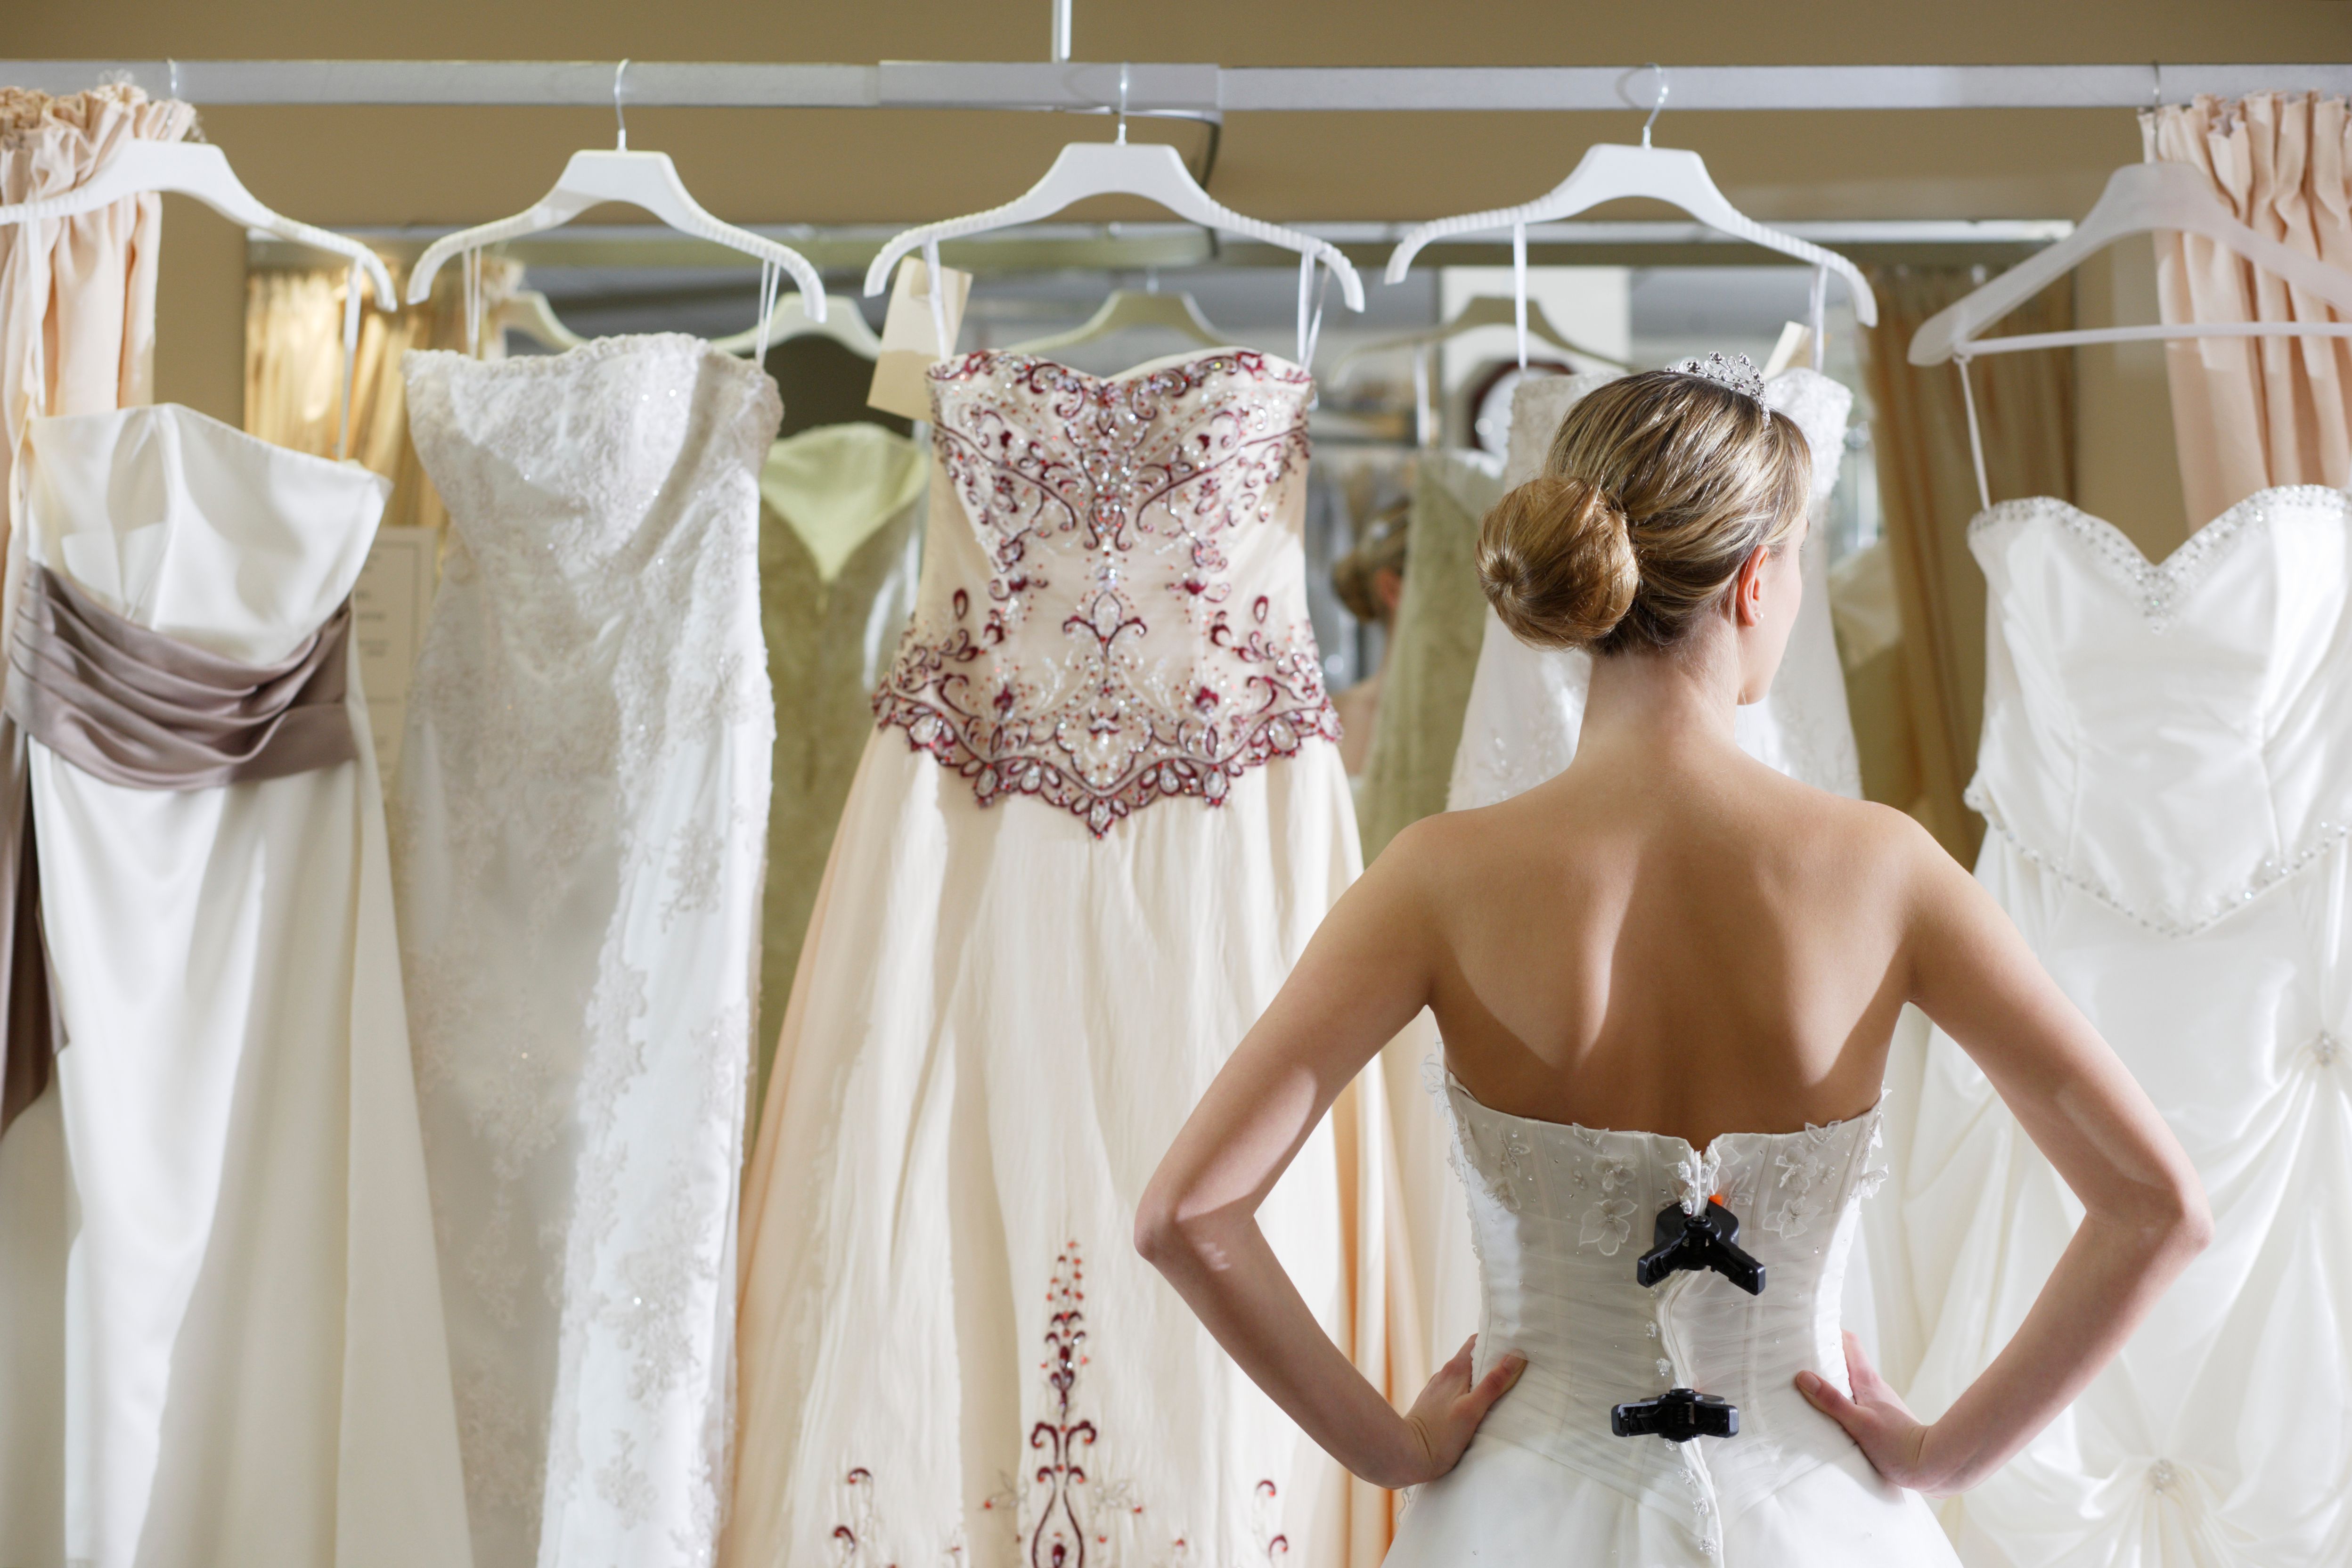 Why second-hand wedding dresses are having a revival as brides